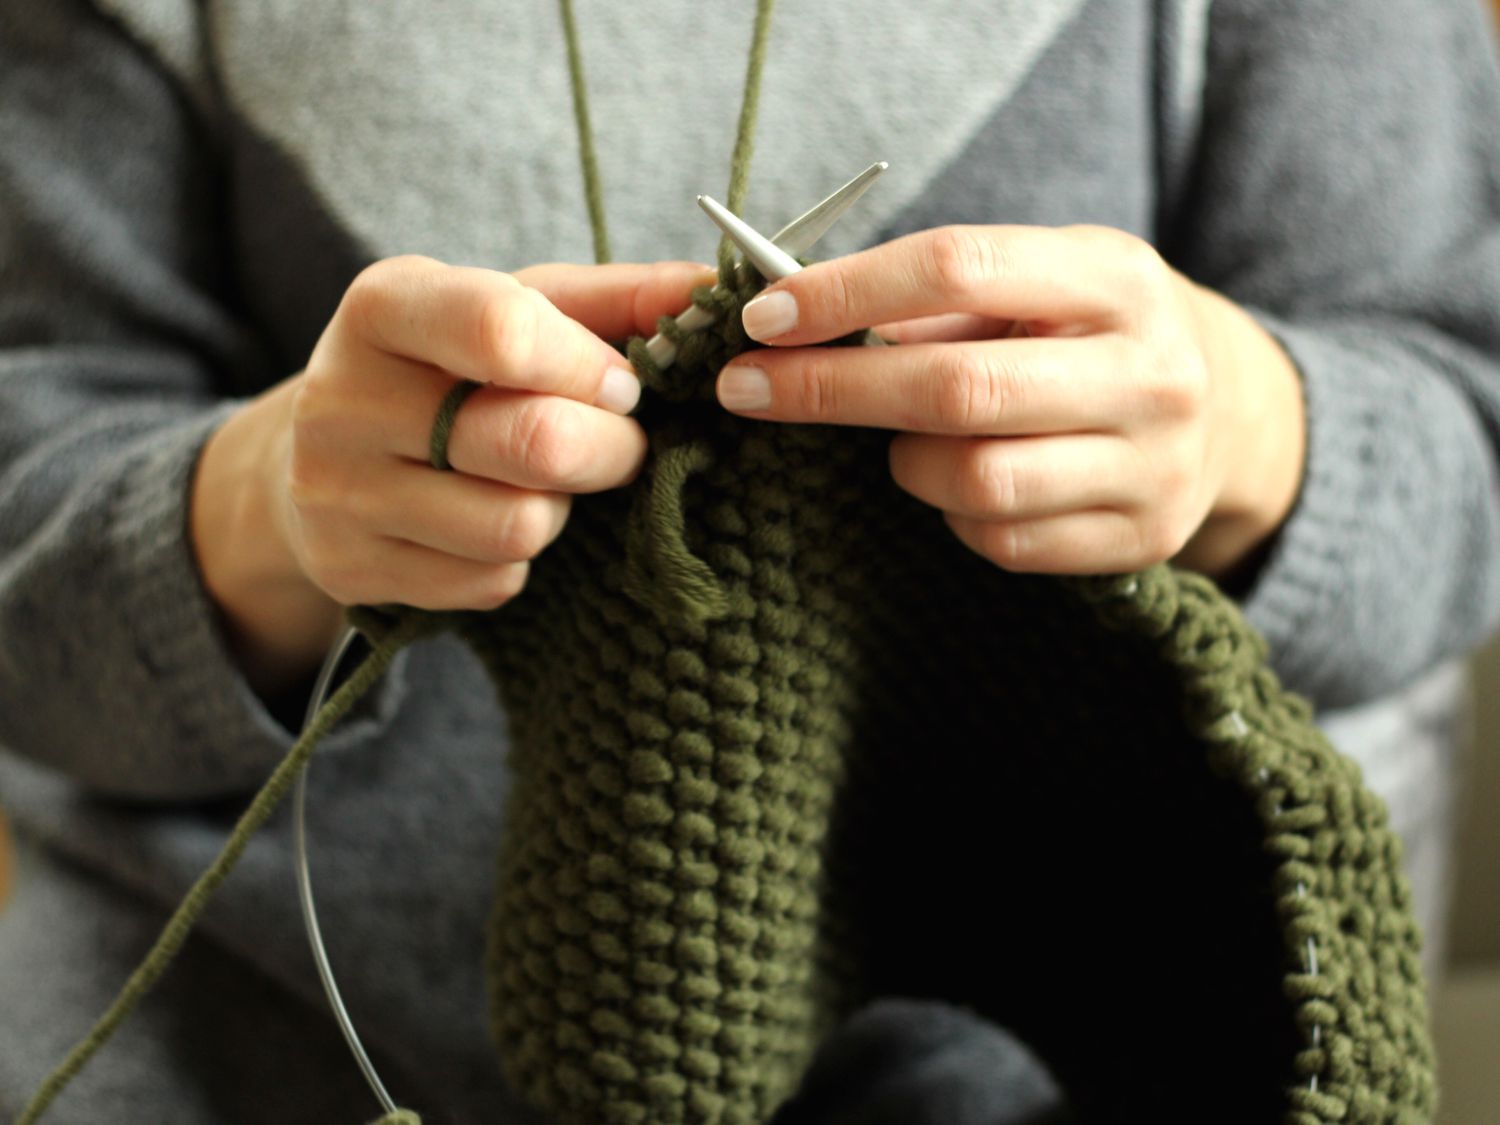 Woman knitting with two circular needles